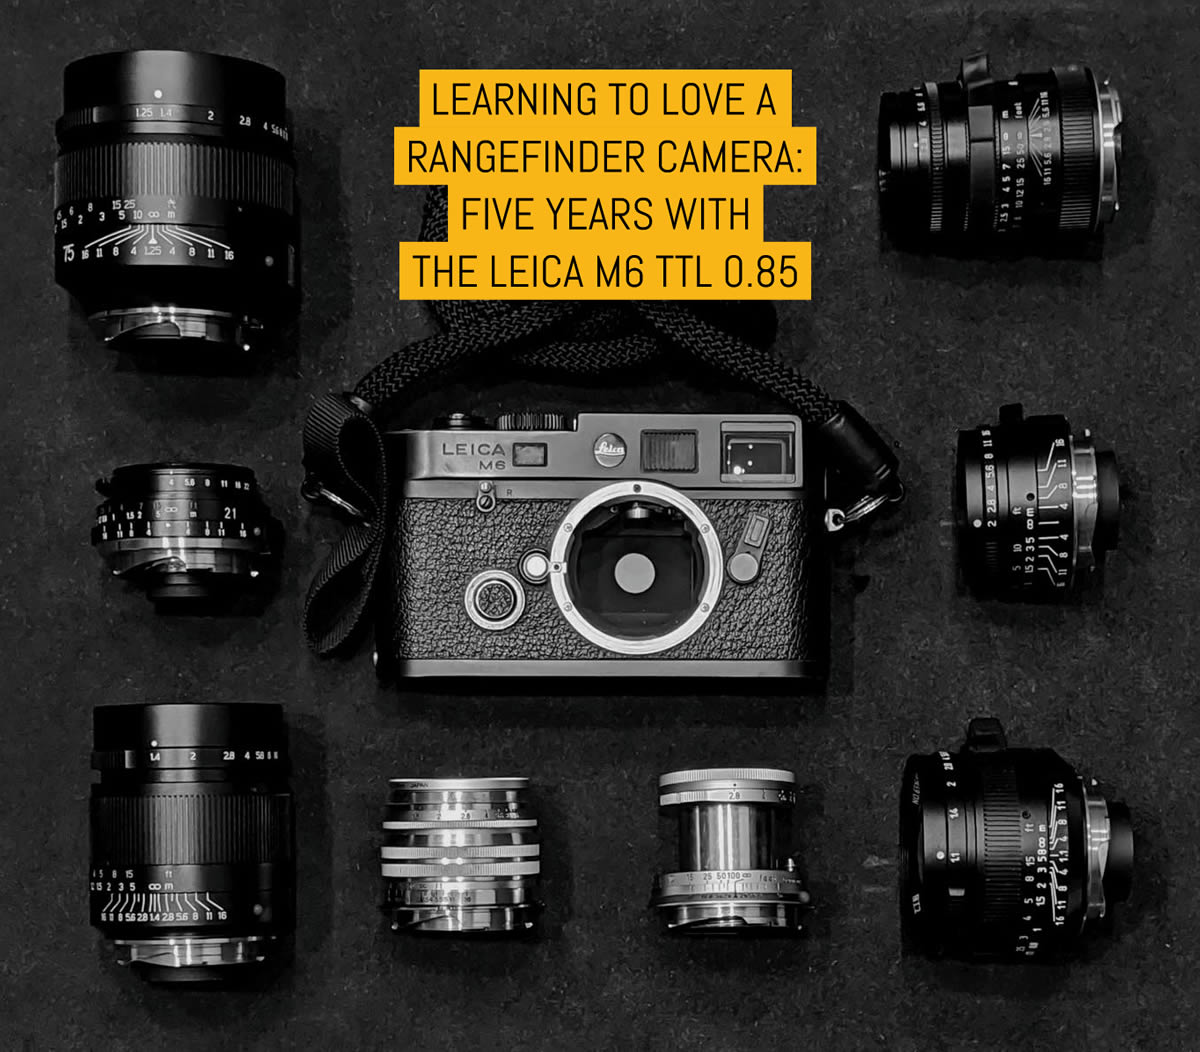 Learning to love a rangefinder camera: Five years with the Leica